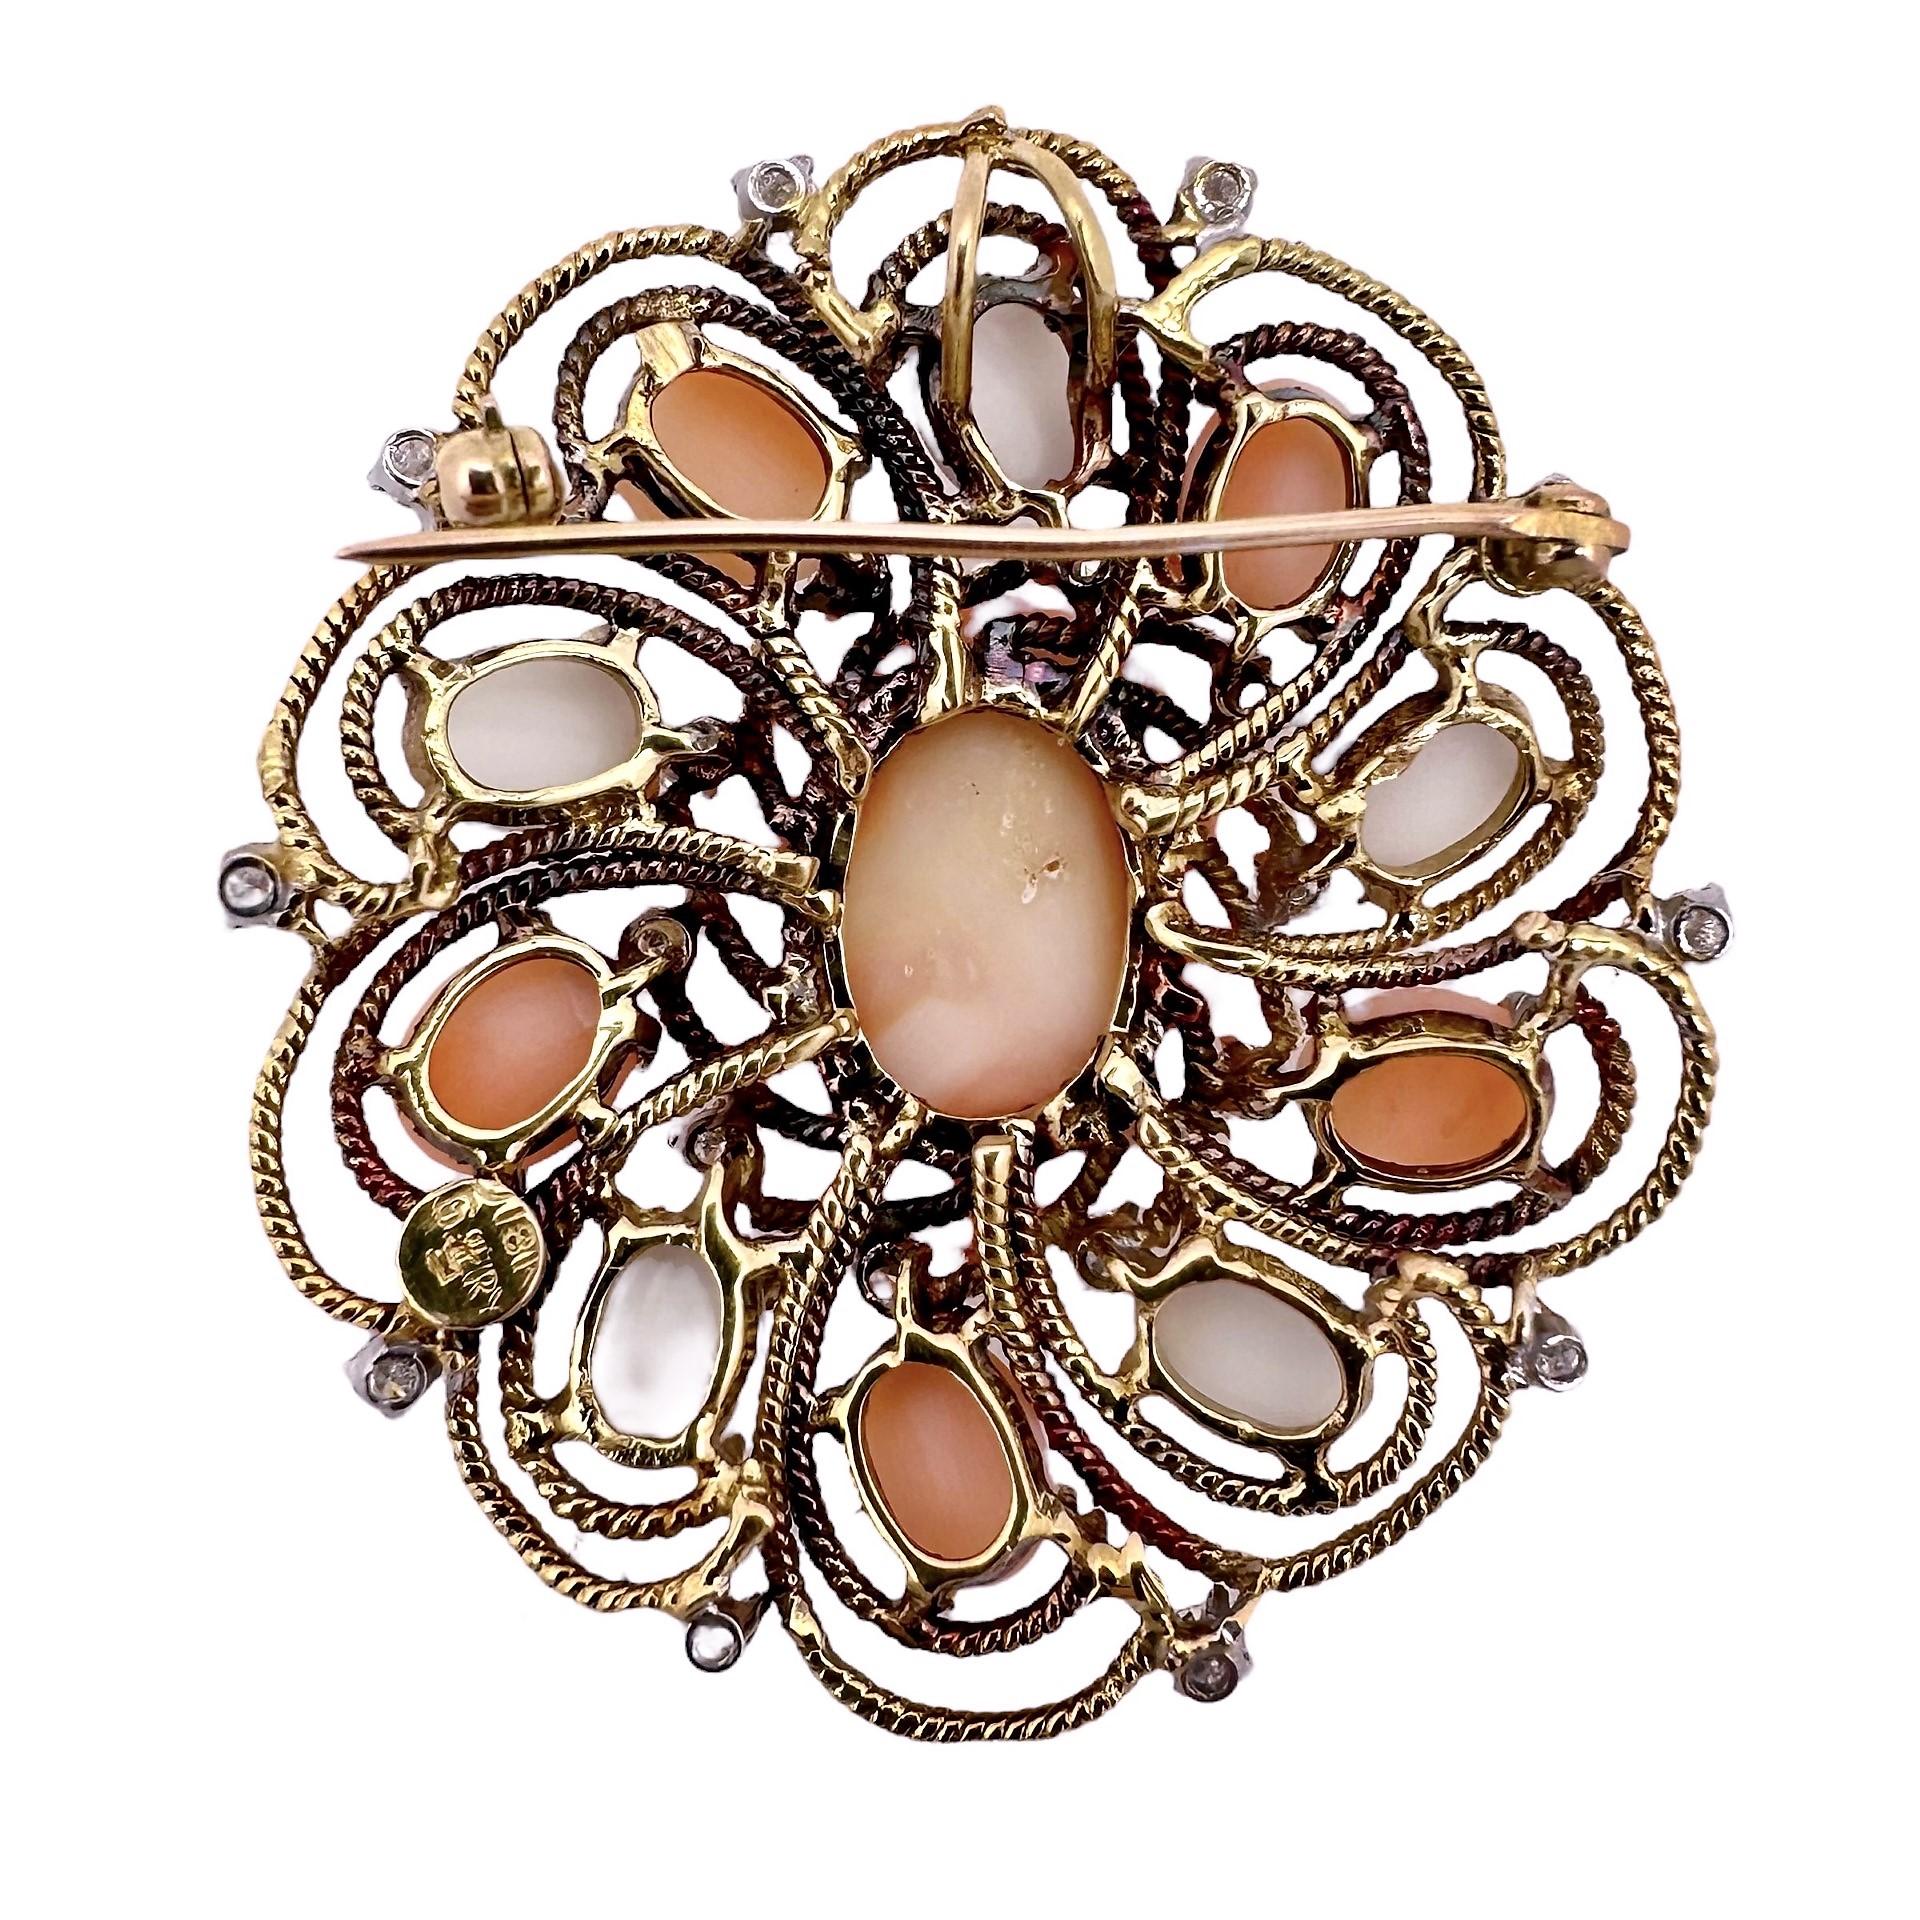 This elegant brooch/pendant is ideal for wear in the summer with white or light coral colored apparel. It is made from hand pulled and twisted 18k yellow gold wire and is set with one fine Angel Skin Coral cabochon measuring 7/8 inches by 5/8 inches